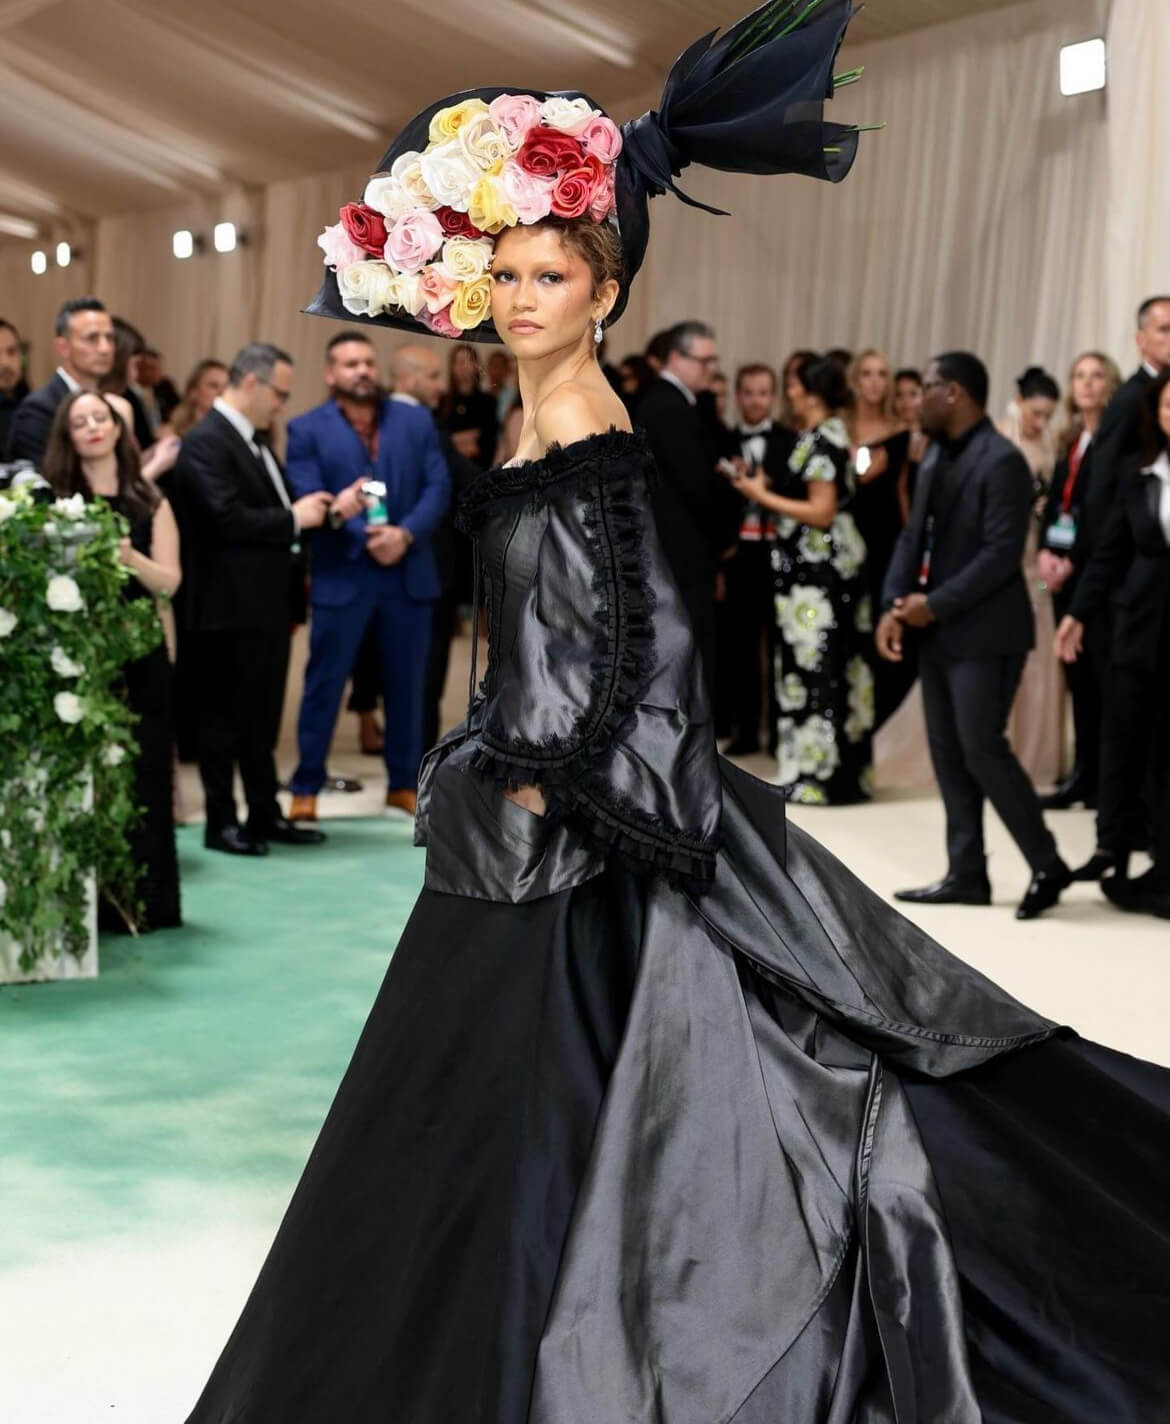 Later in the evening, Zendaya surprised everyone by reappearing in a stunning black gown from John Galliano’s Givenchy era, dating back to 1996, as reported by Harper’s Bazaar. 